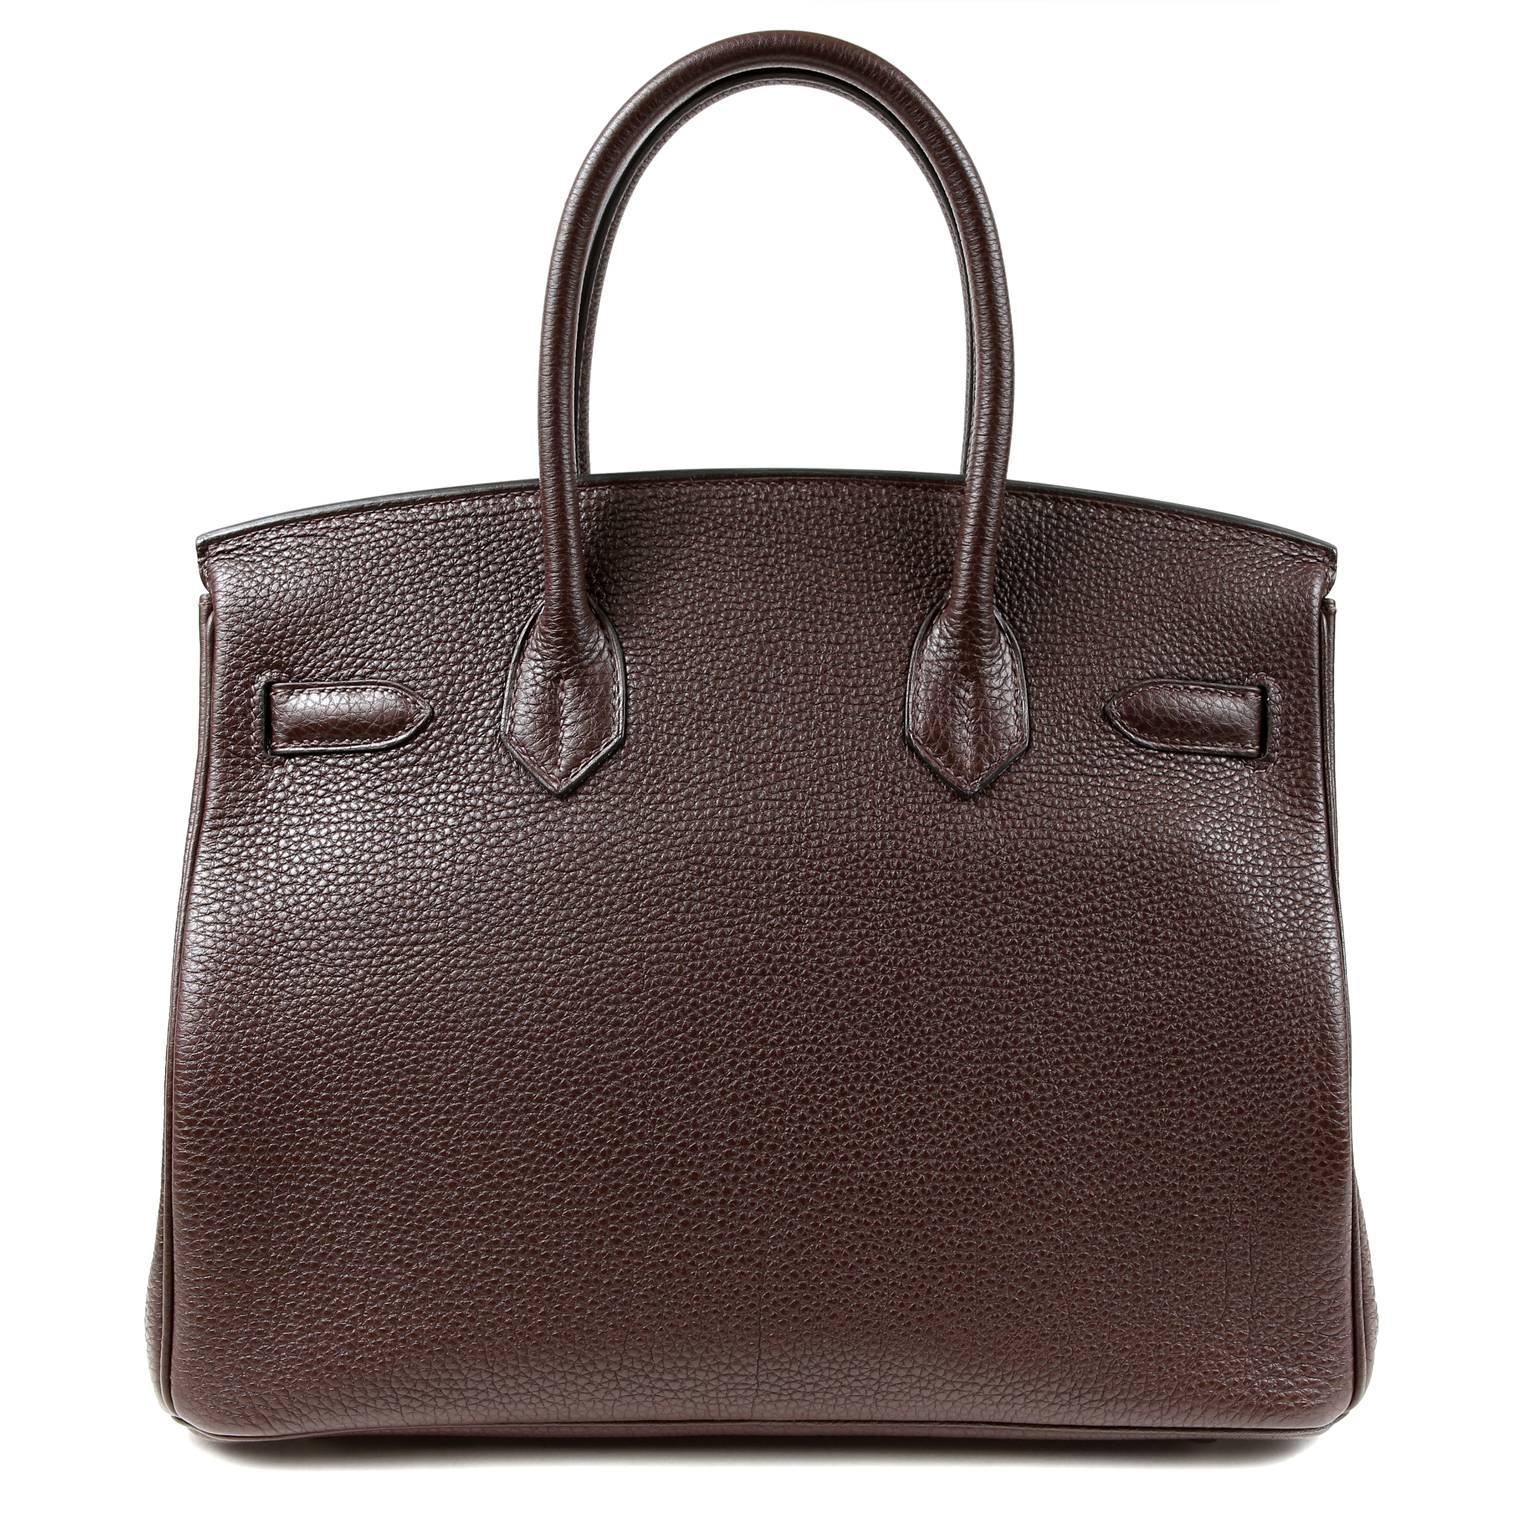 Hermès Chocolate Togo 30 cm Birkin-  Pristine Condition
  Considered the ultimate in luxury fashion, the elusive Birkin often requires excessive waitlist times.   Chocolate Togo paired with Palladium hardware is a highly desirable neutral